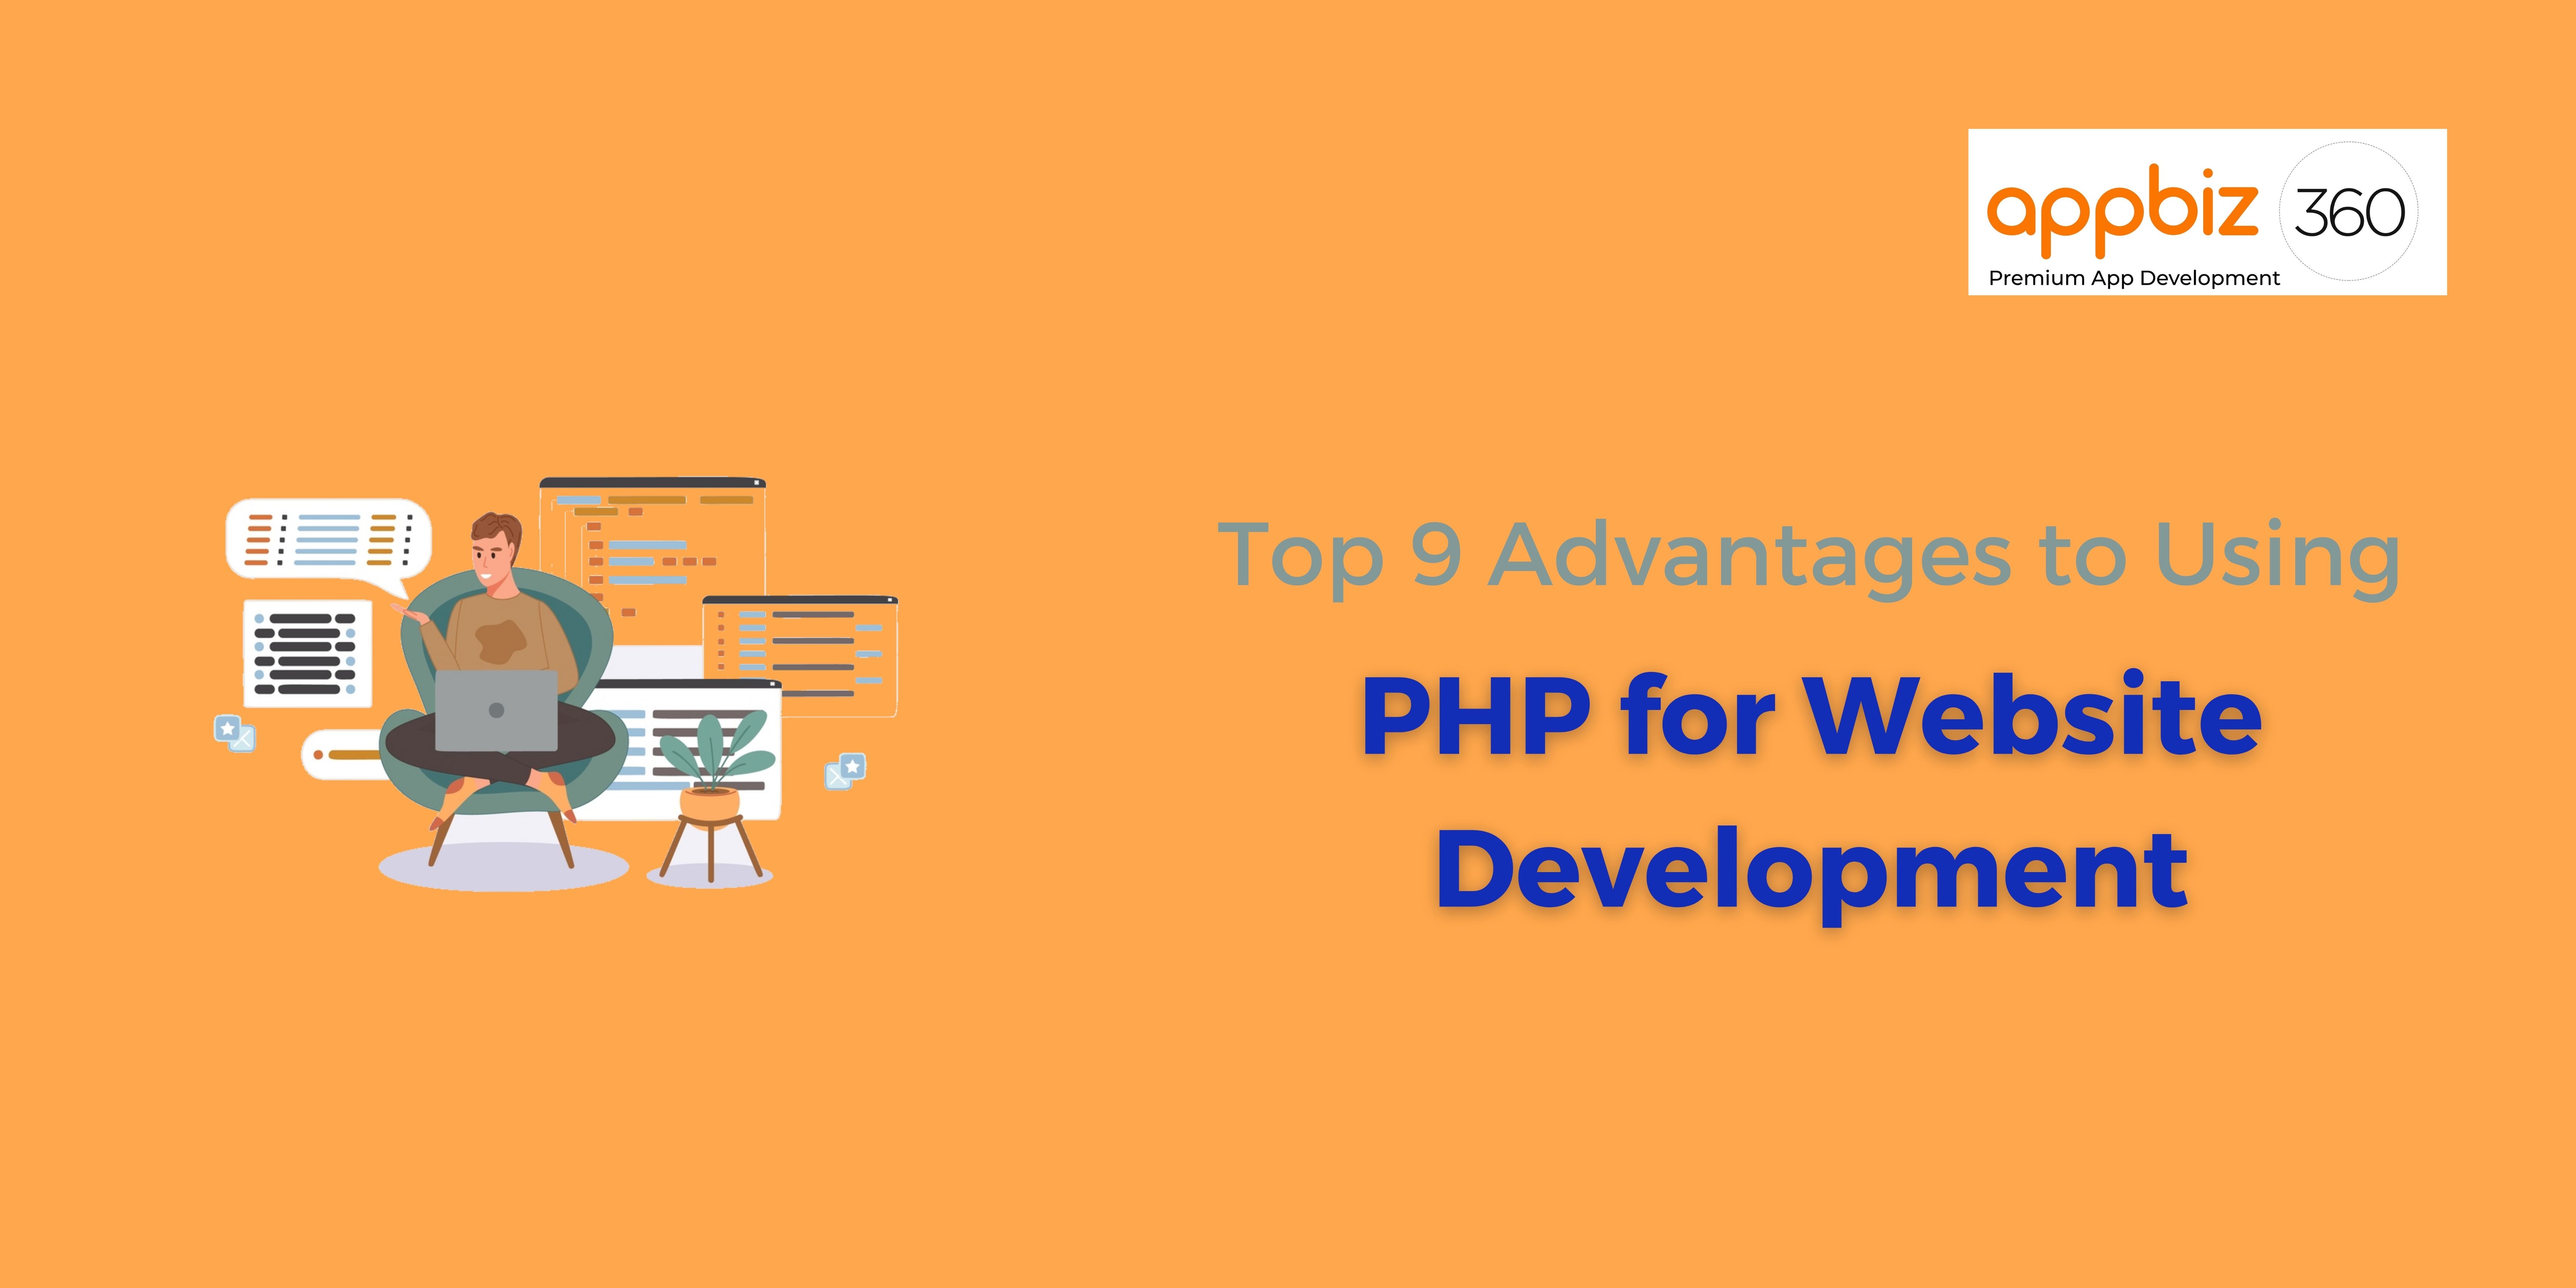 Top 9 Advantages to Using PHP for Website Development